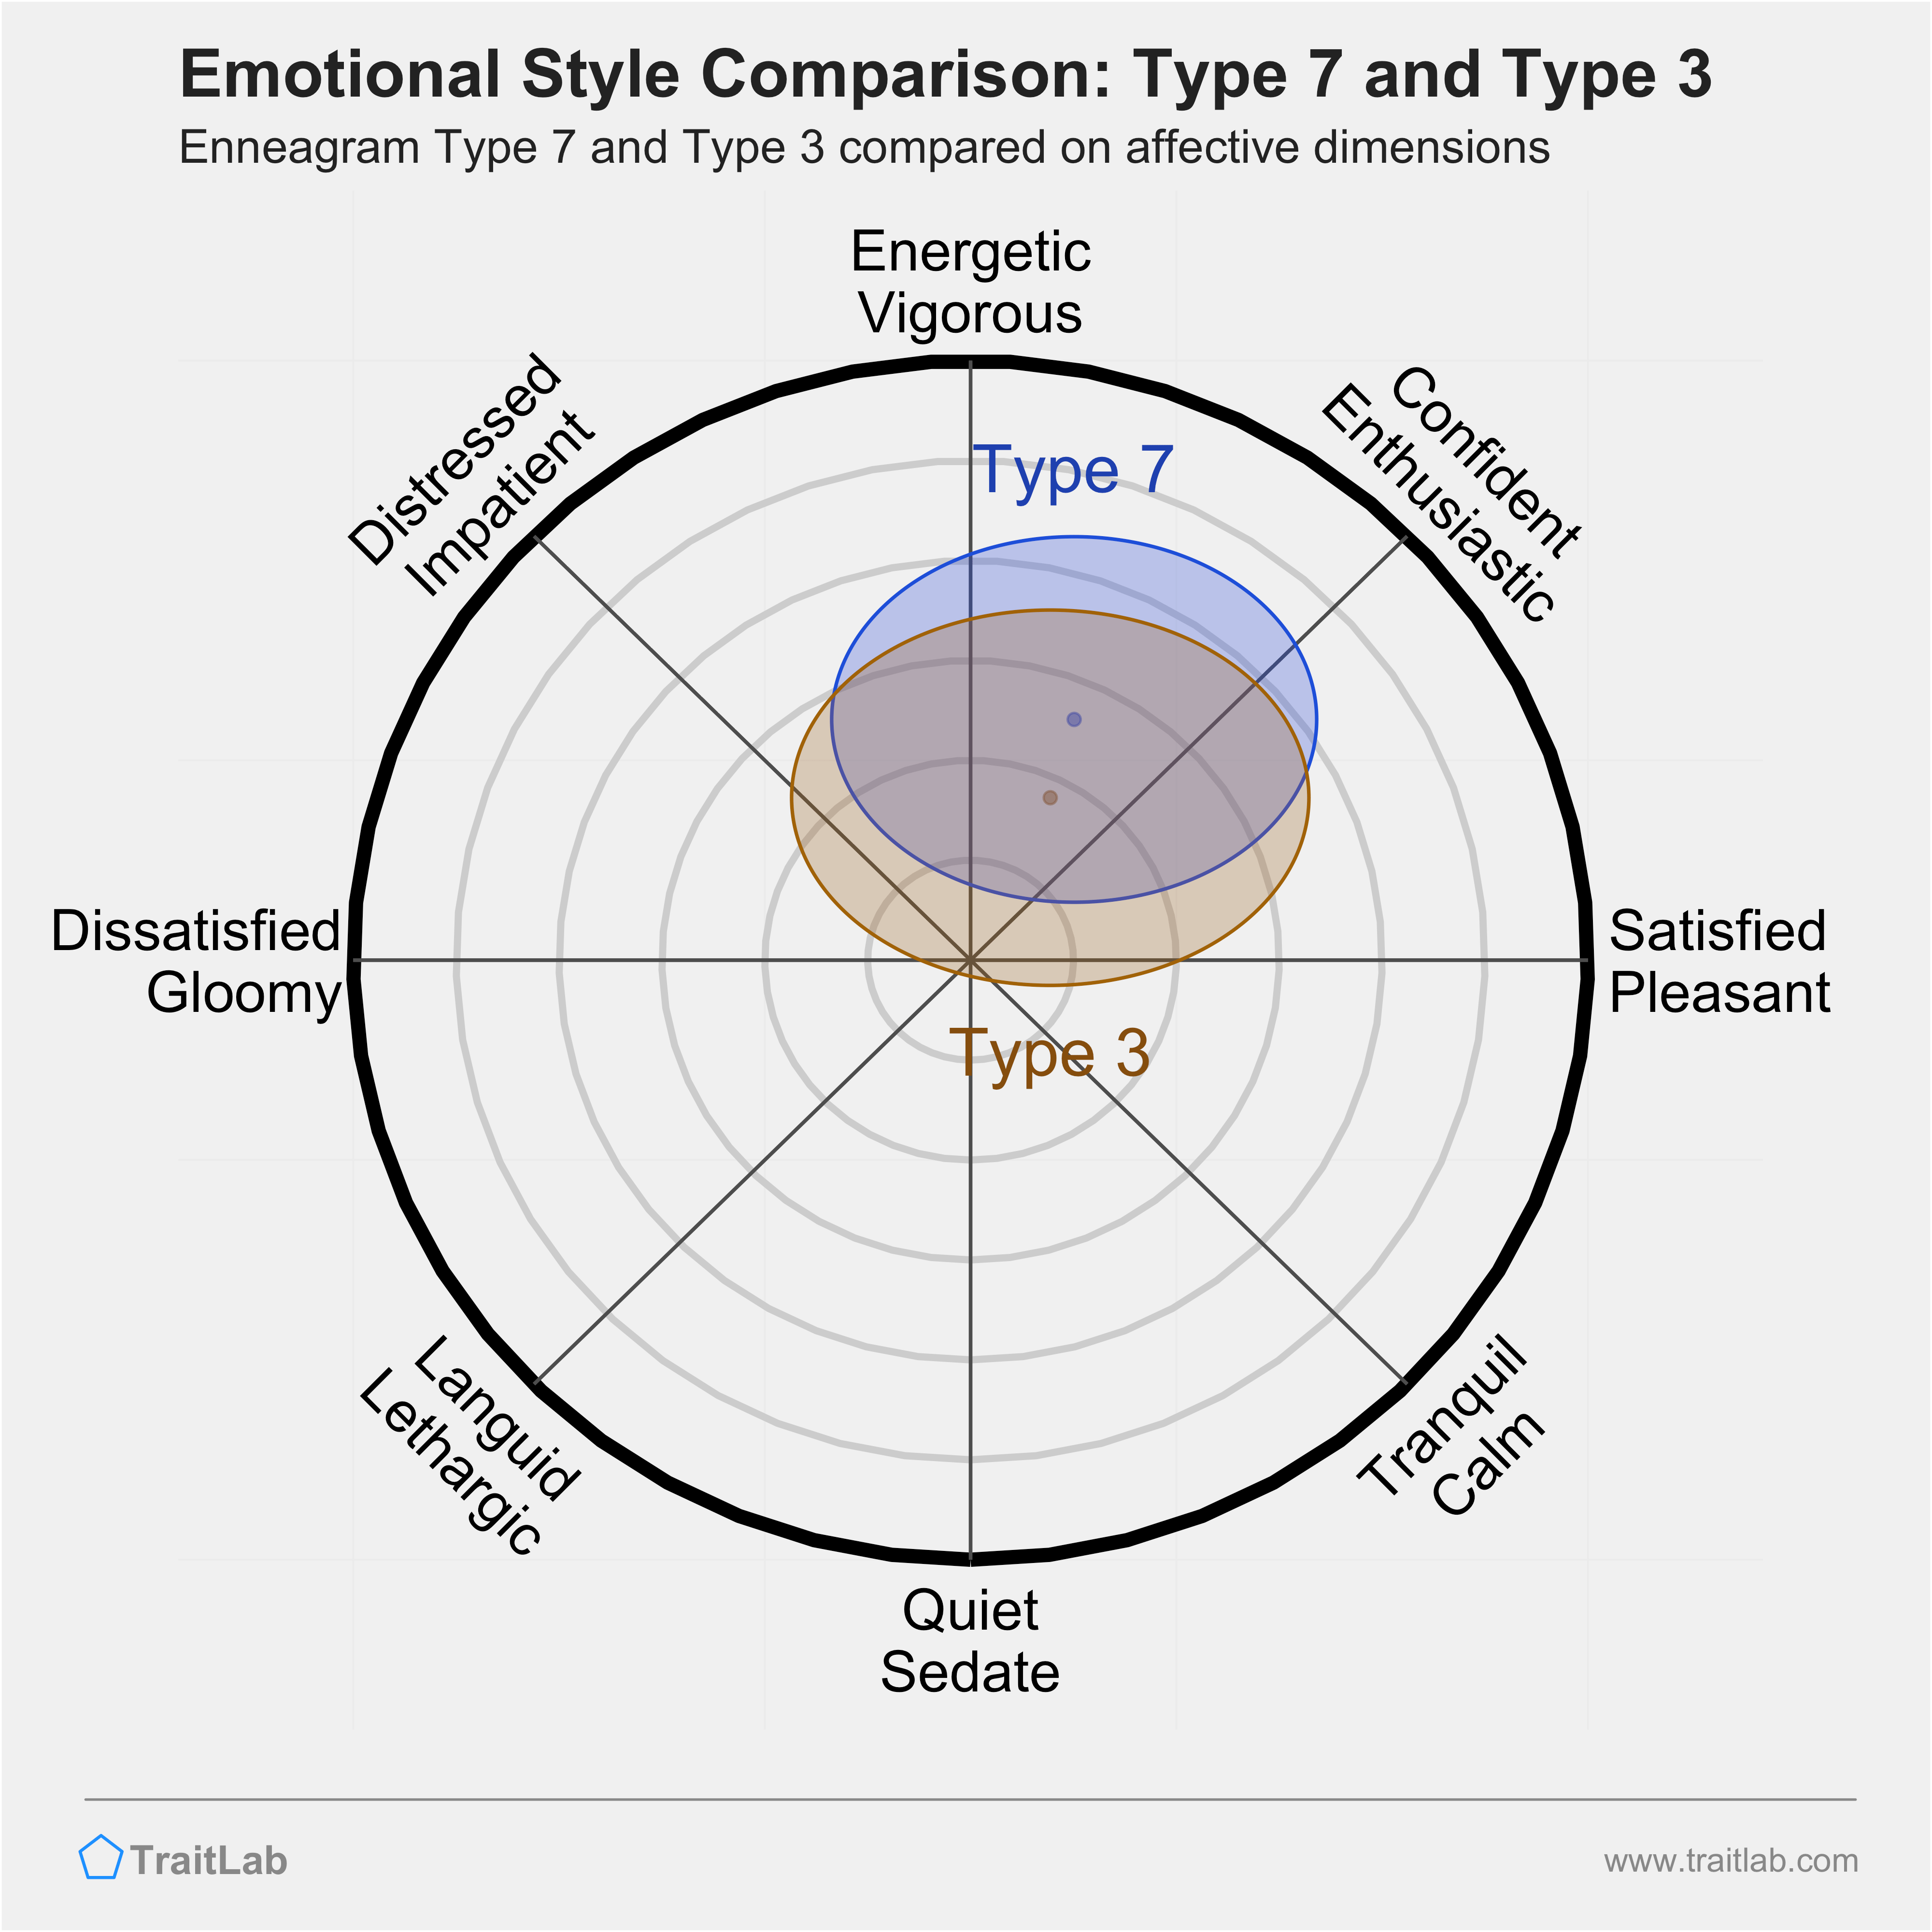 Type 7 and Type 3 comparison across emotional (affective) dimensions